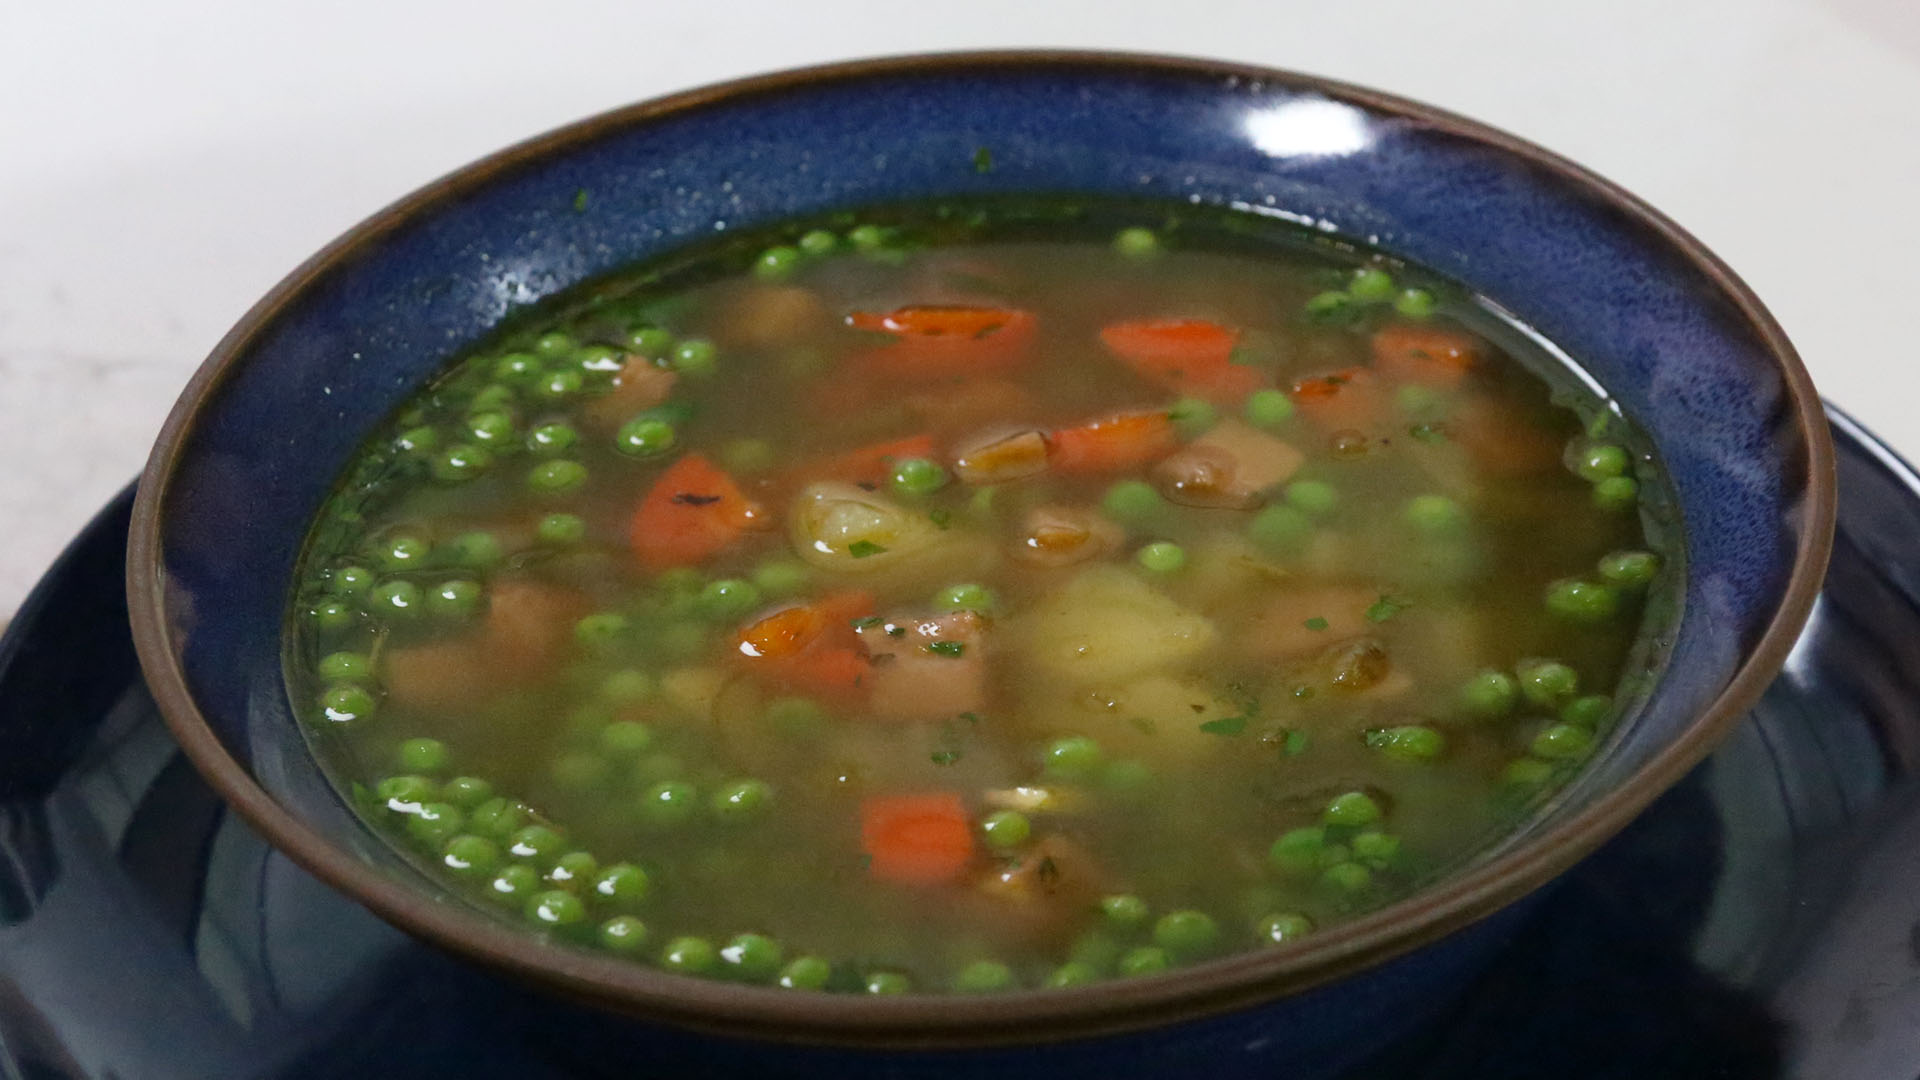 Leftover ham and pea soup